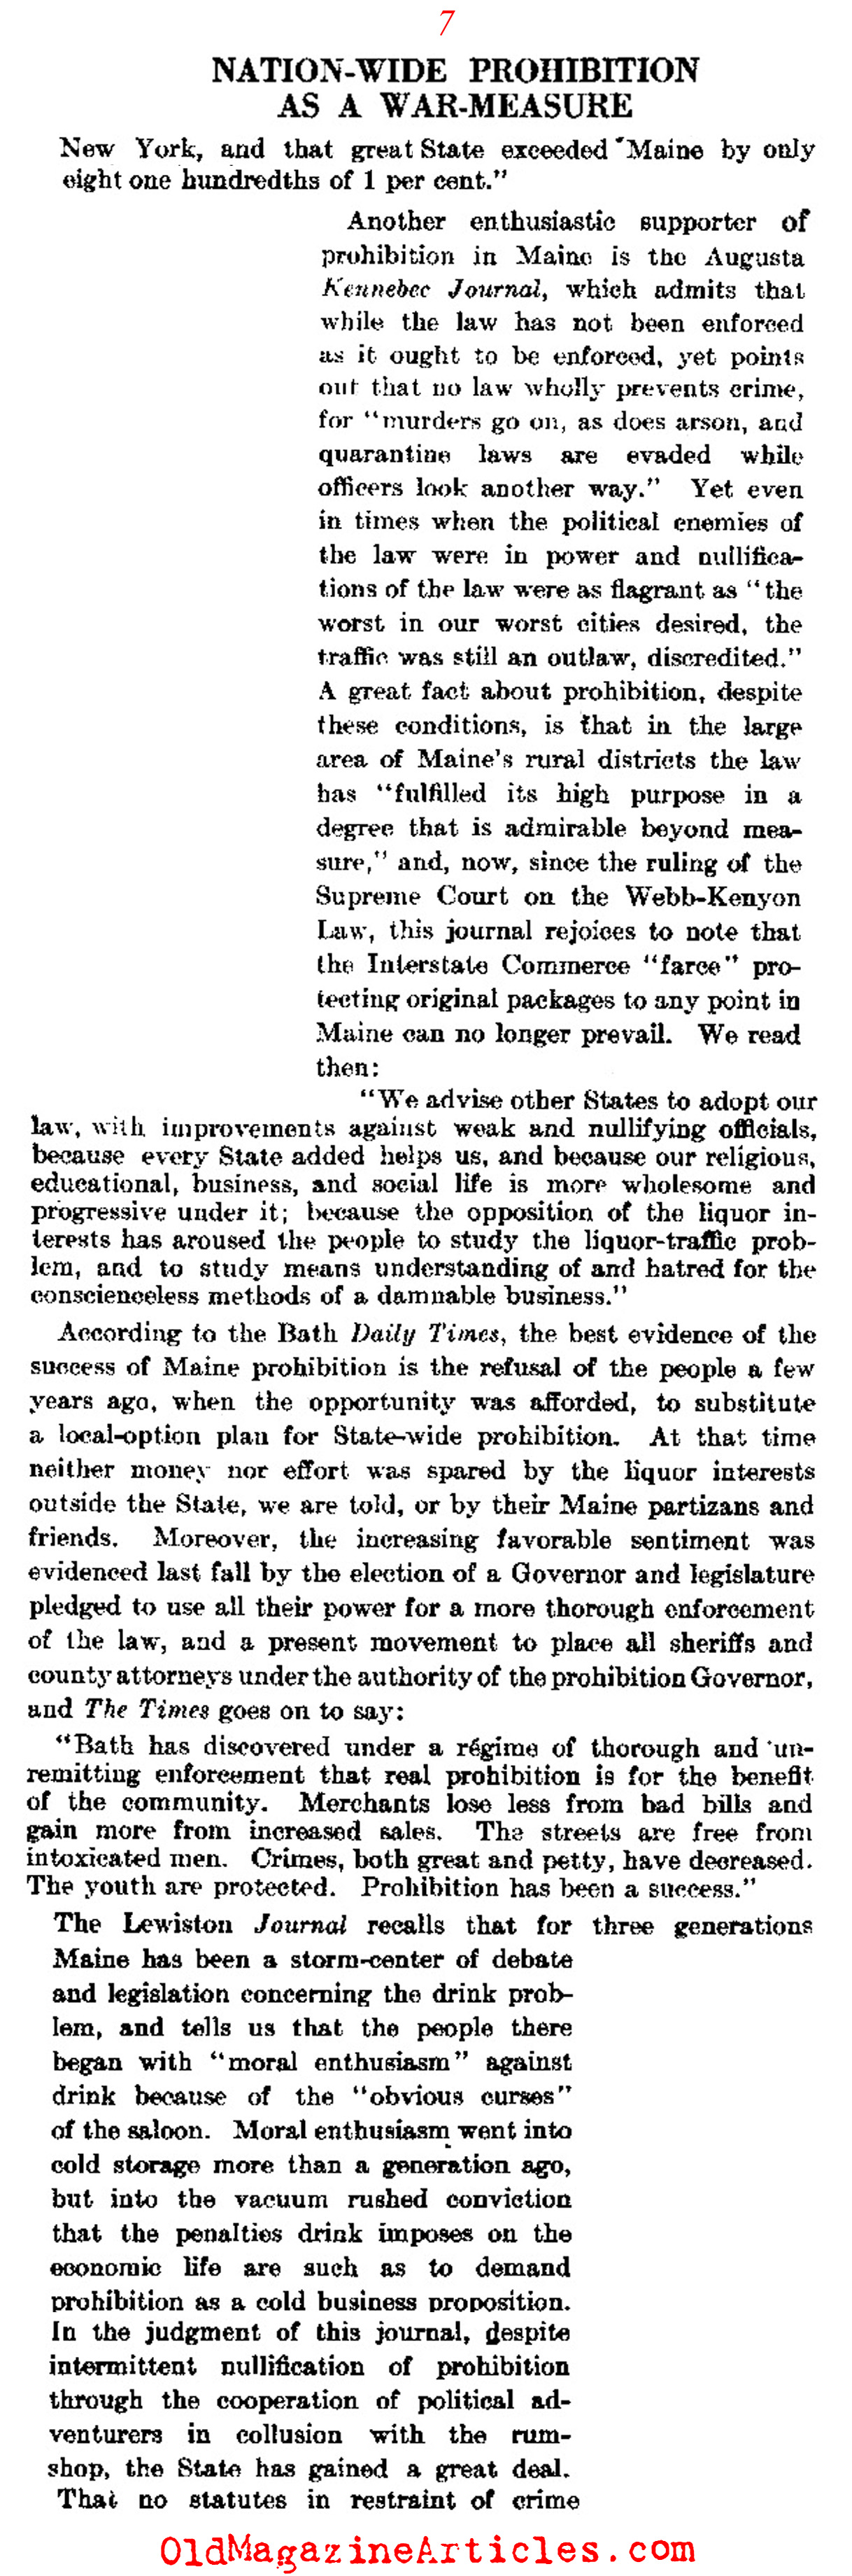 W.W. I and the Advancement of Prohibition (Literary Digest, 1916)